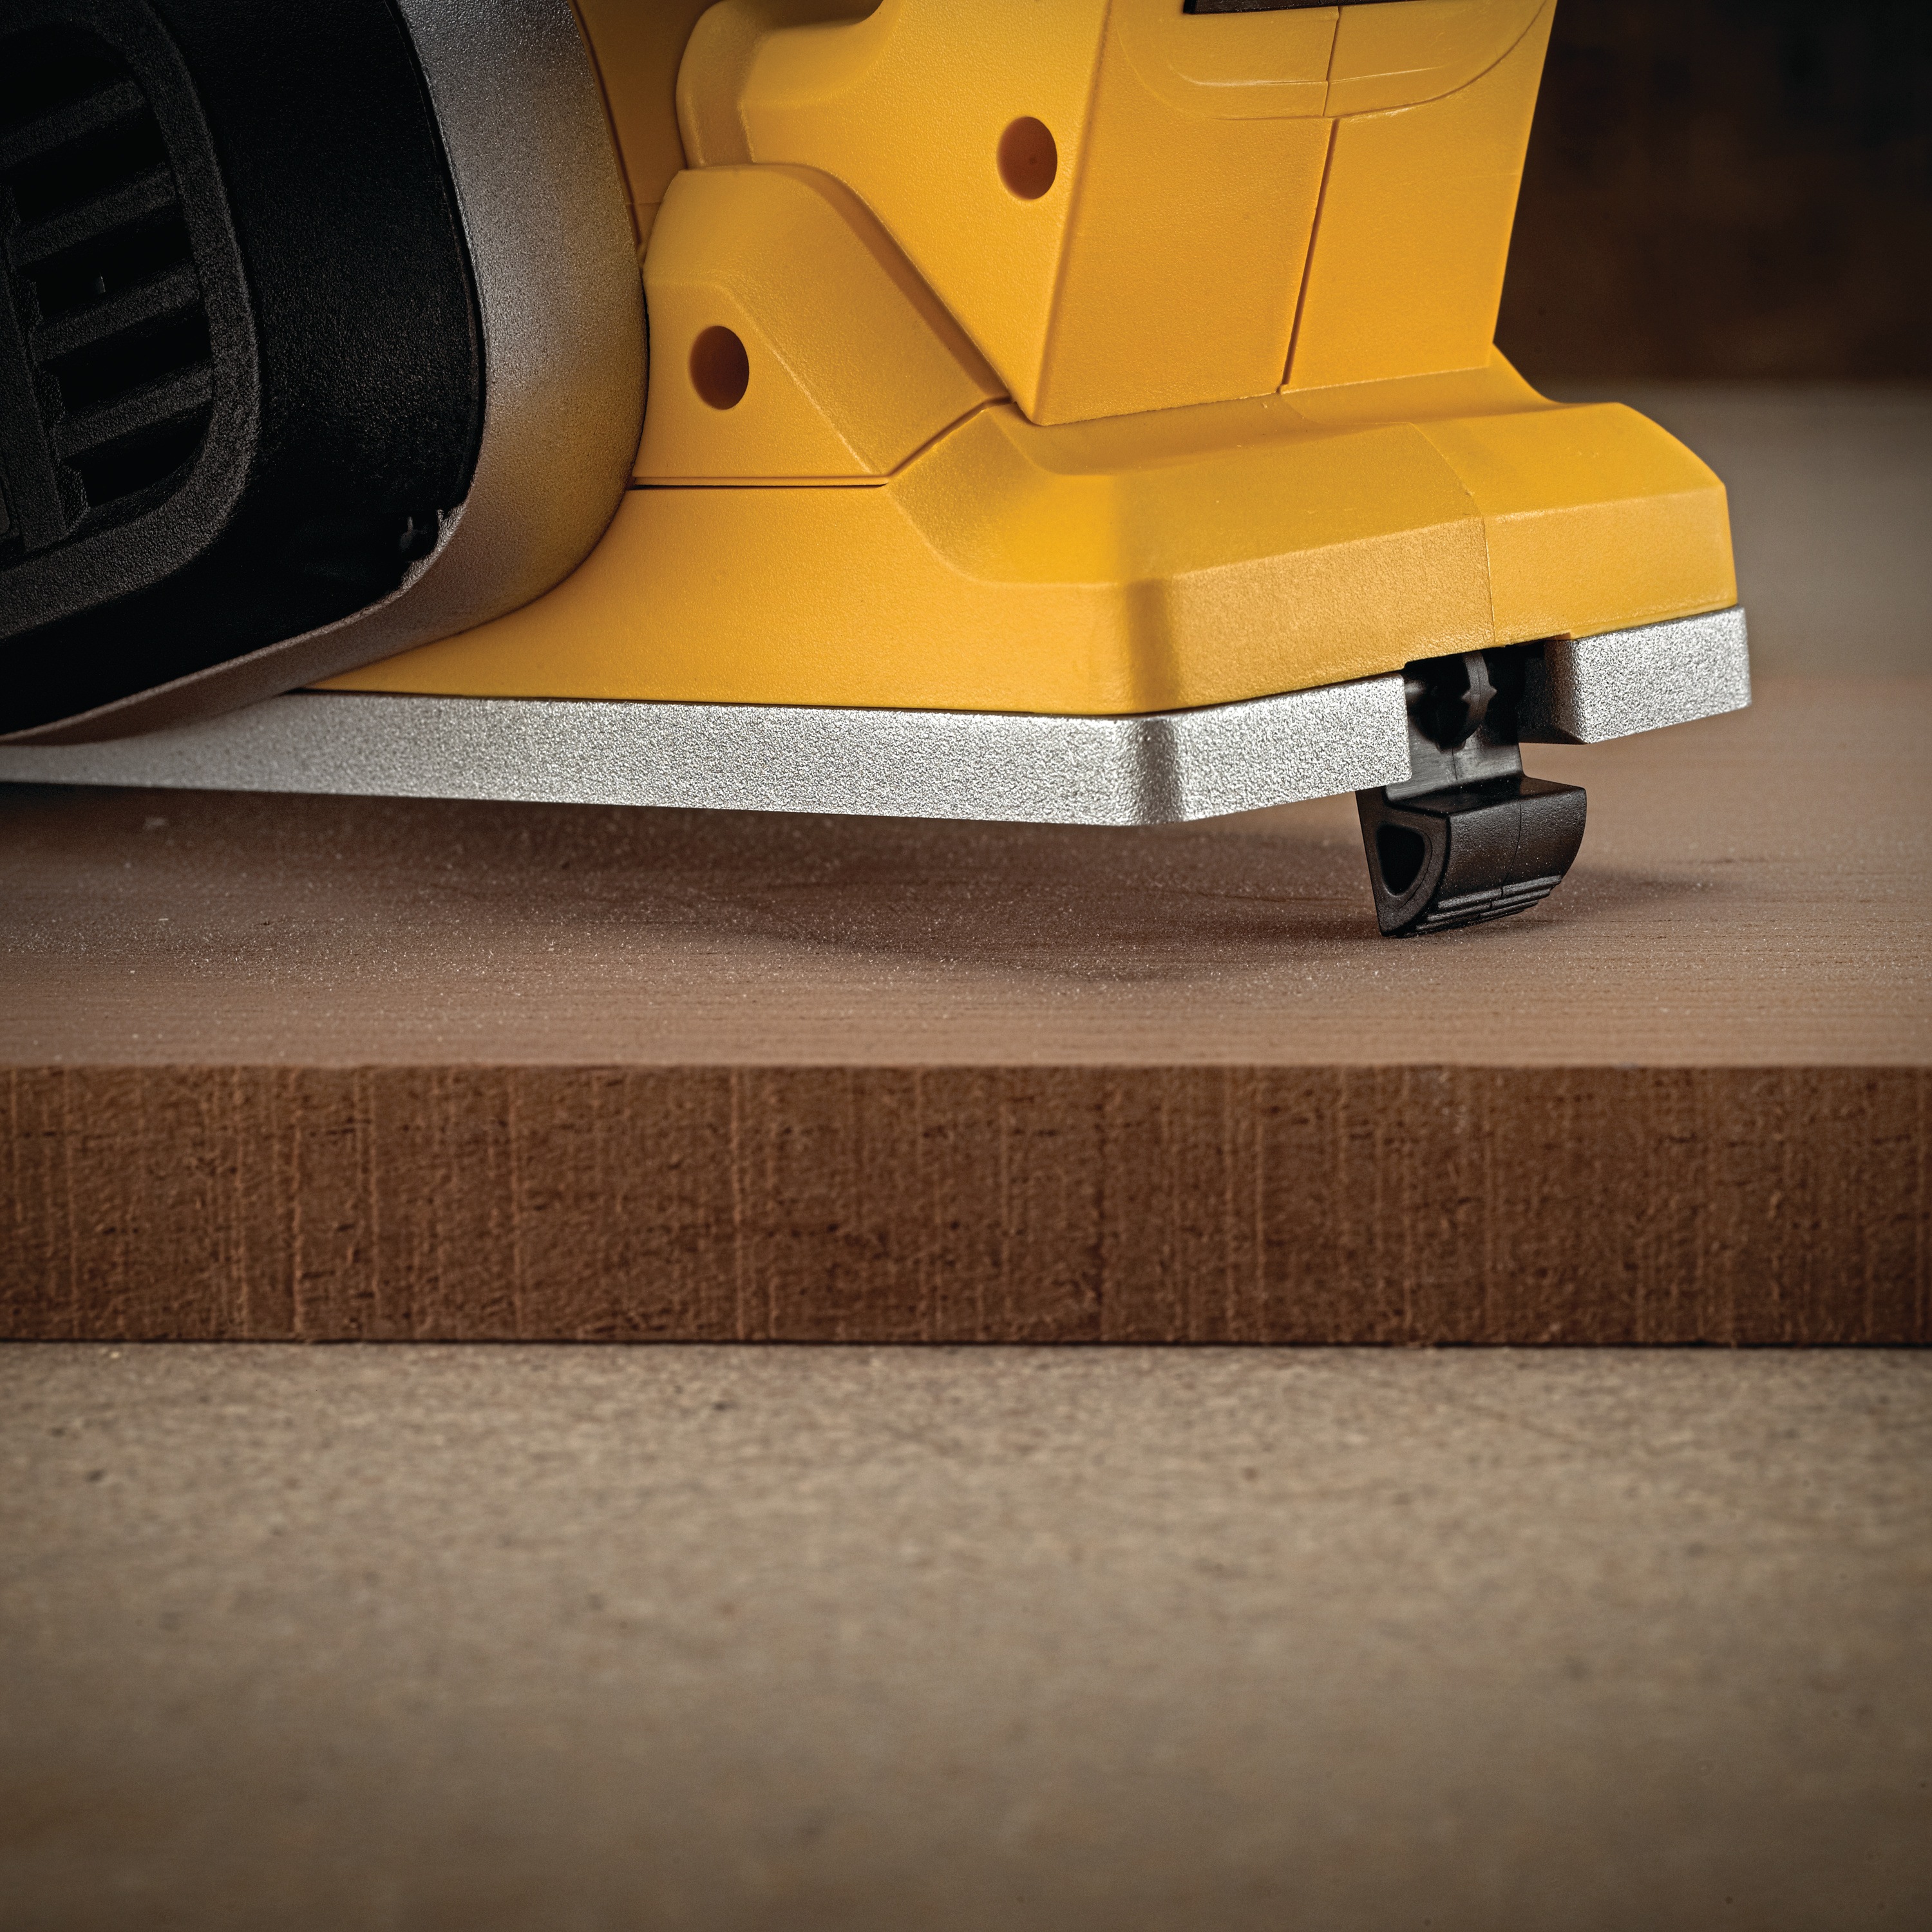 Foot lock-off feature of  Brushless cordless planer.